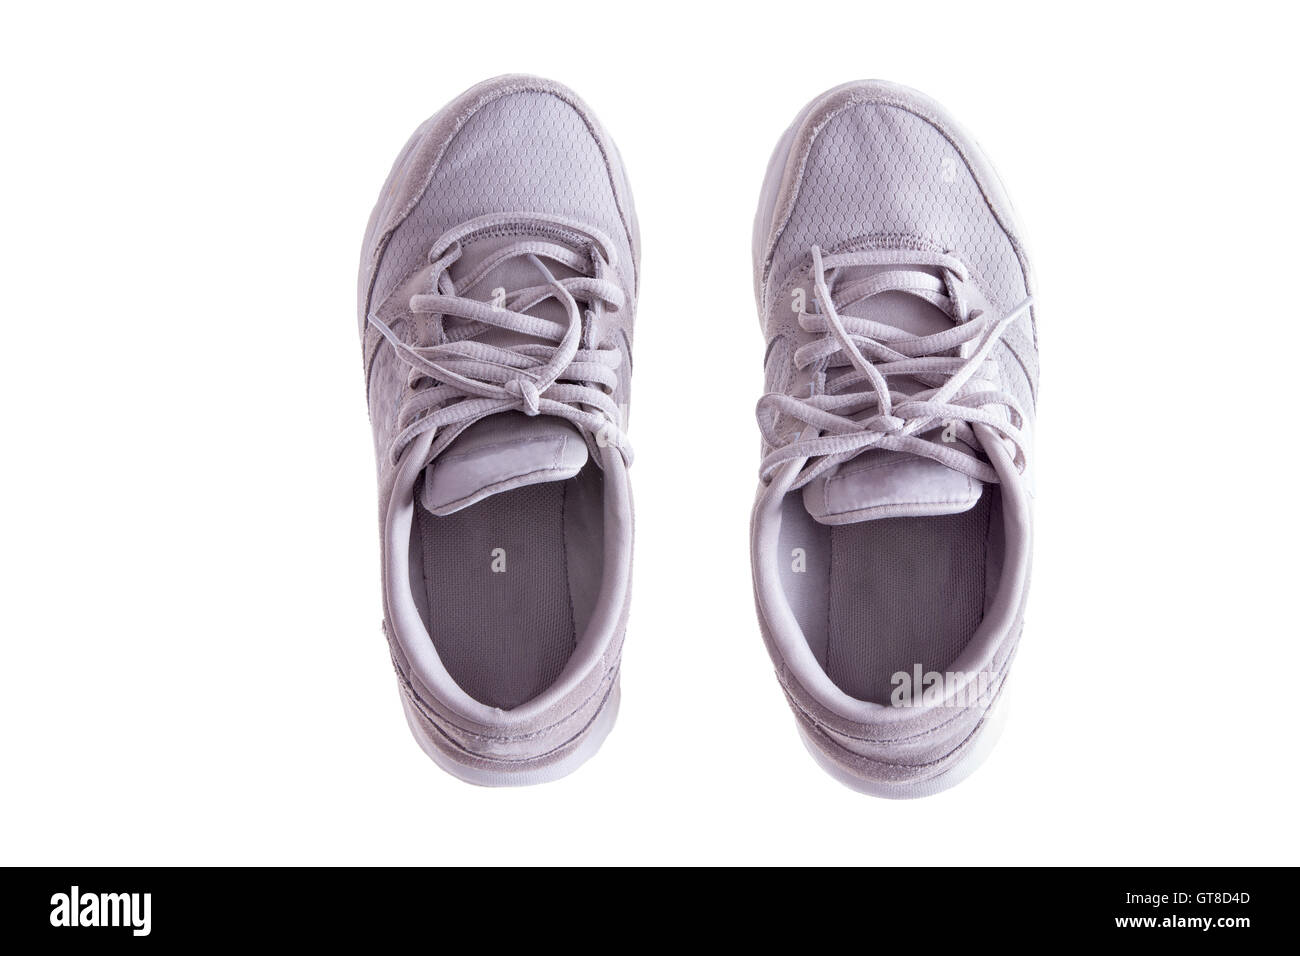 High Angle View of Pair of Worn White Sneakers or Running Shoes with Tied Laces on White Background Stock Photo